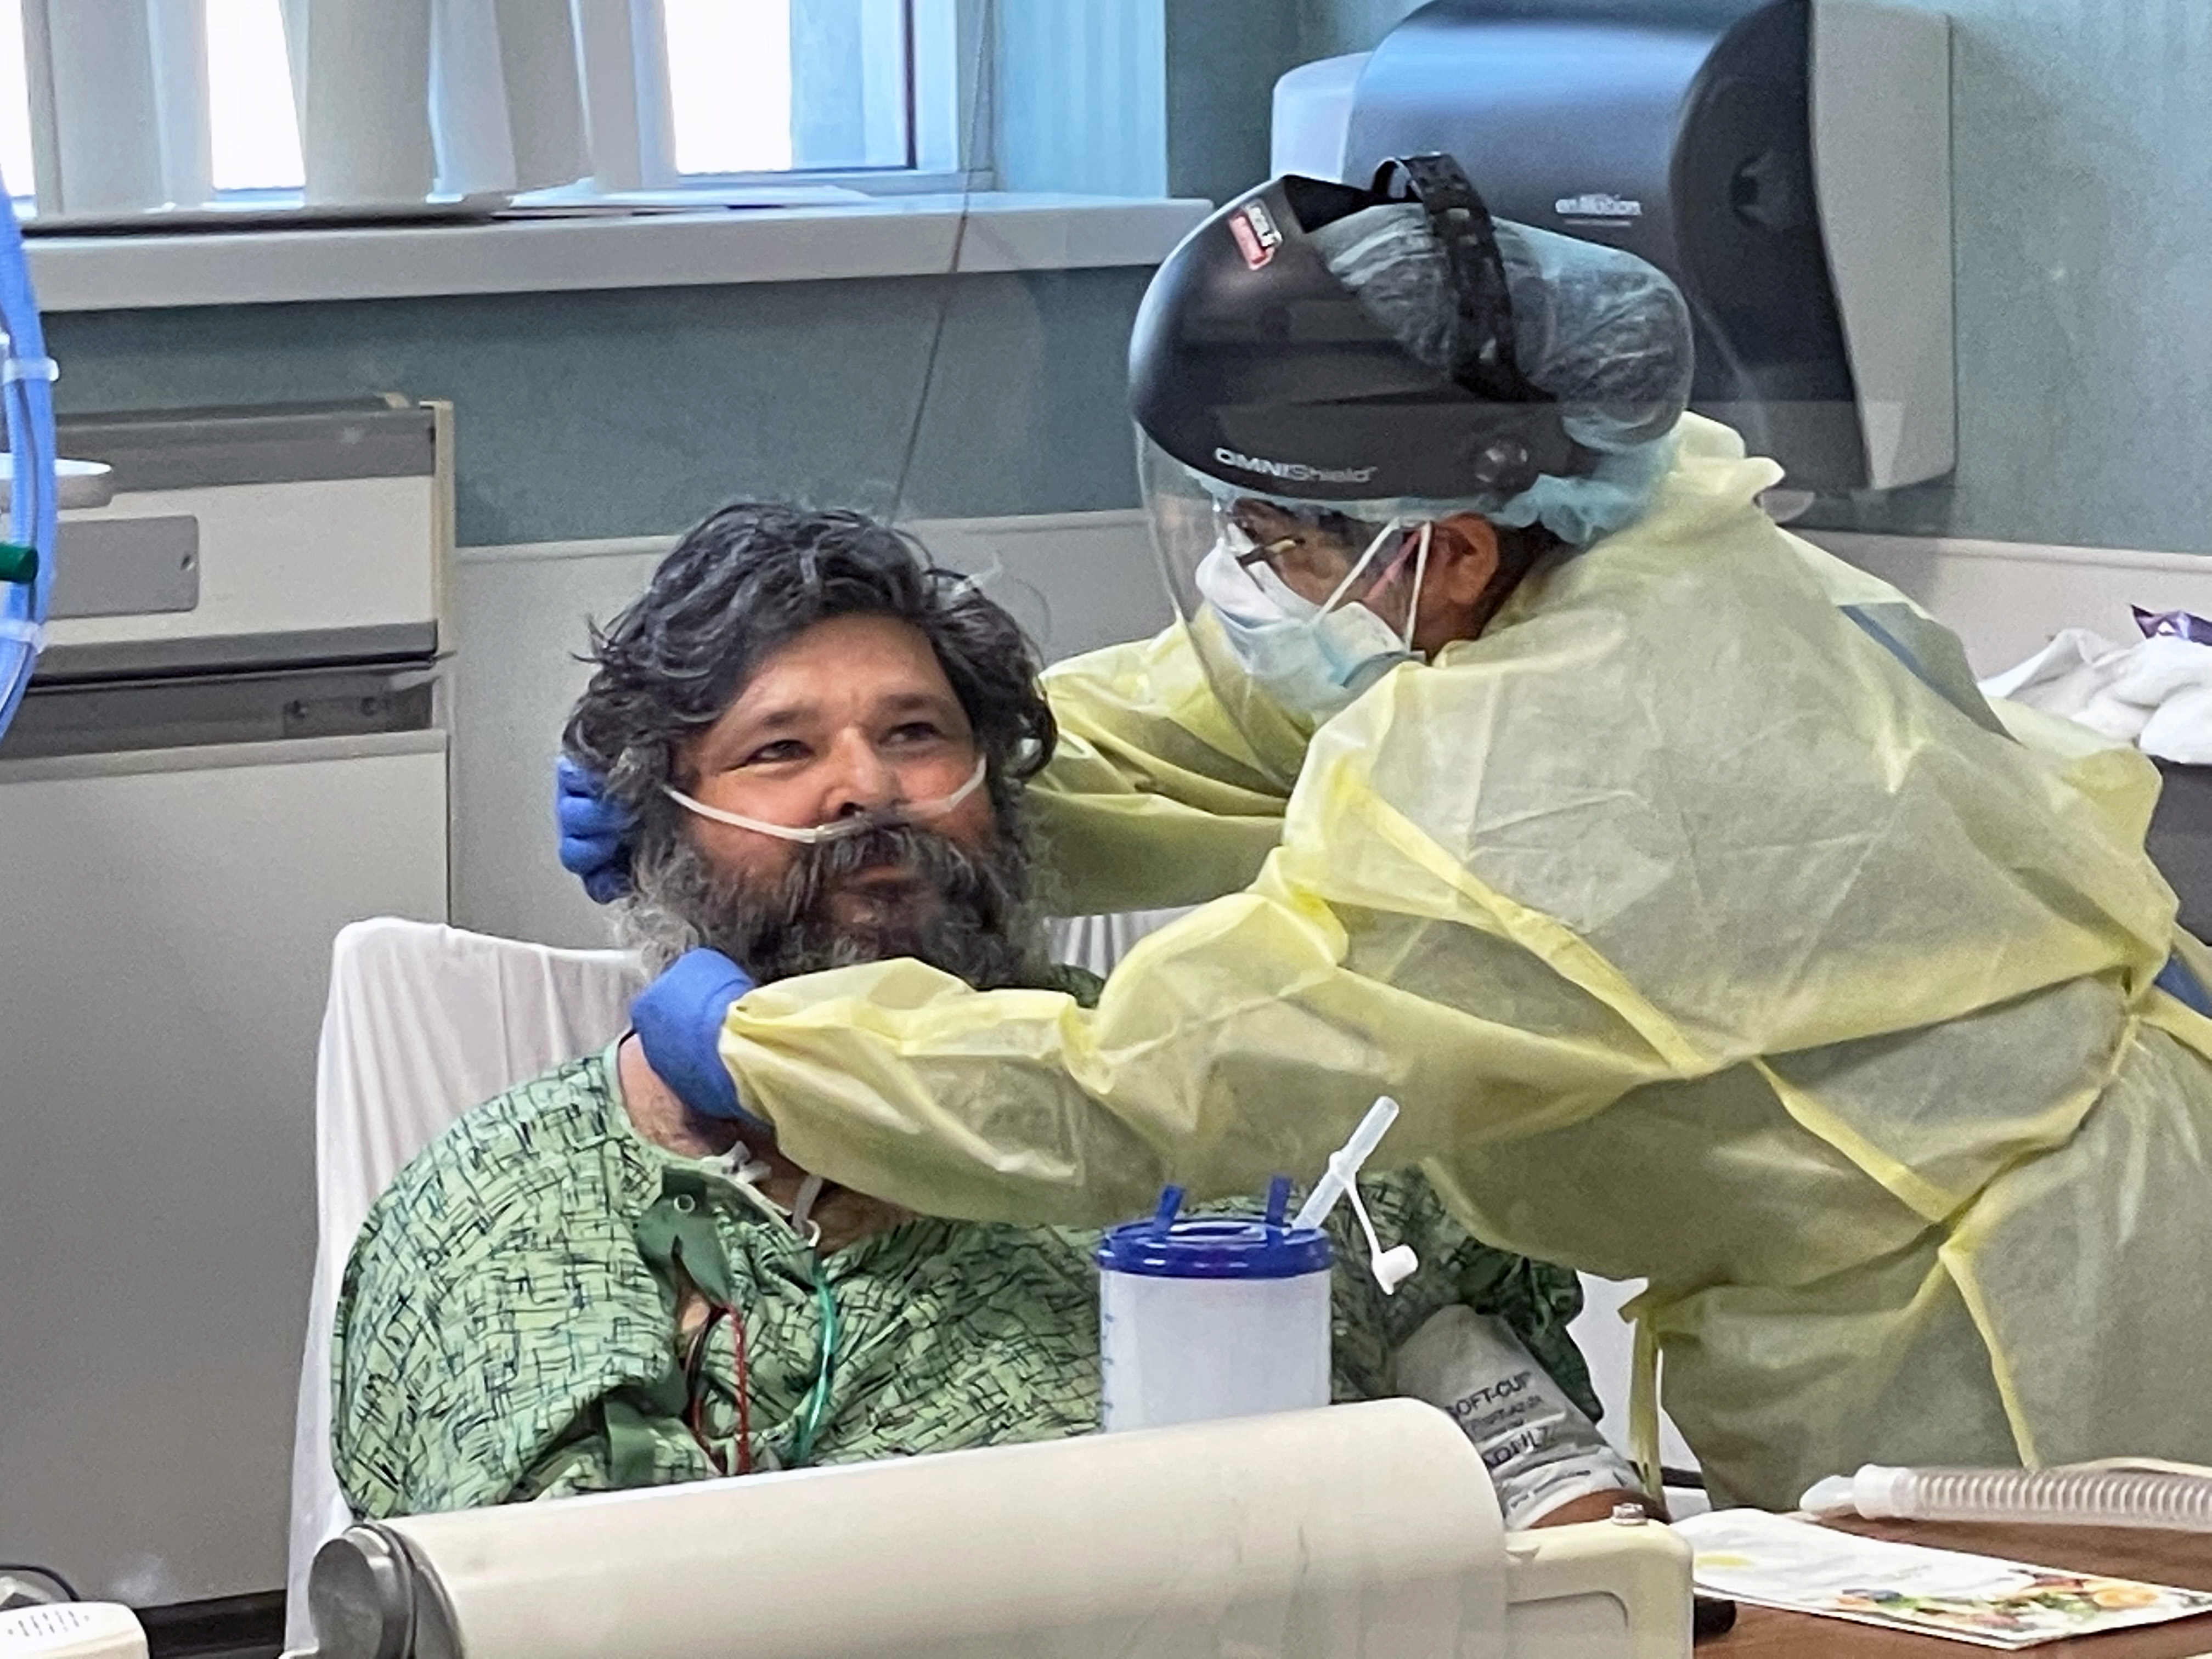 A COVID-19 patient is treated in the ICU at Providence St Joseph Hospital in Orange, California